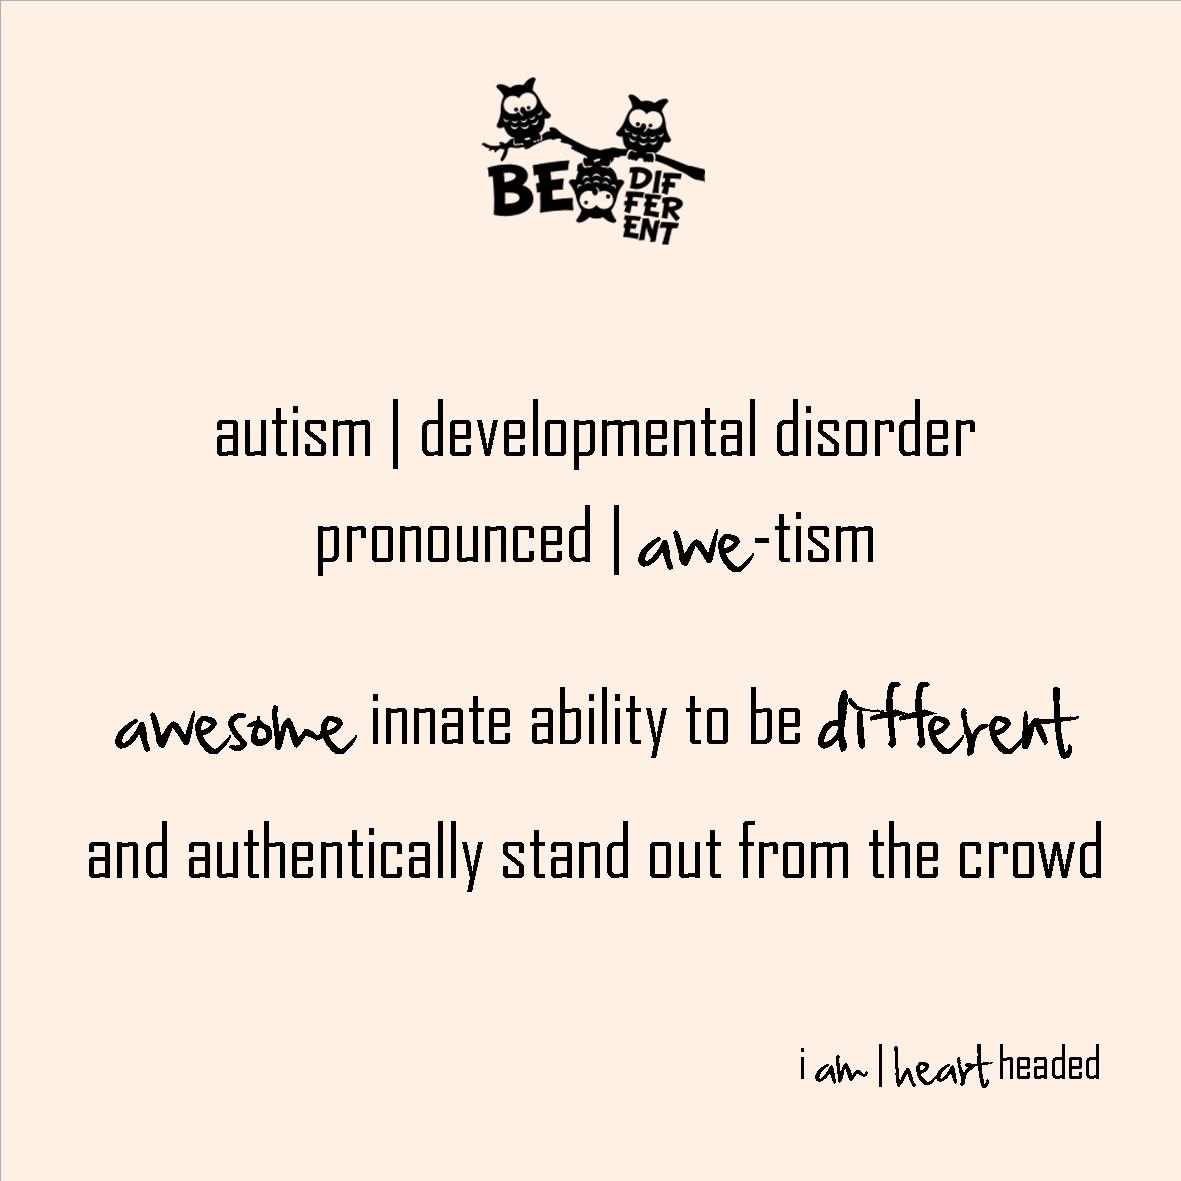 full-size featured image of quote 'autism awe-tism' in category 'witty' at i am | heart headed